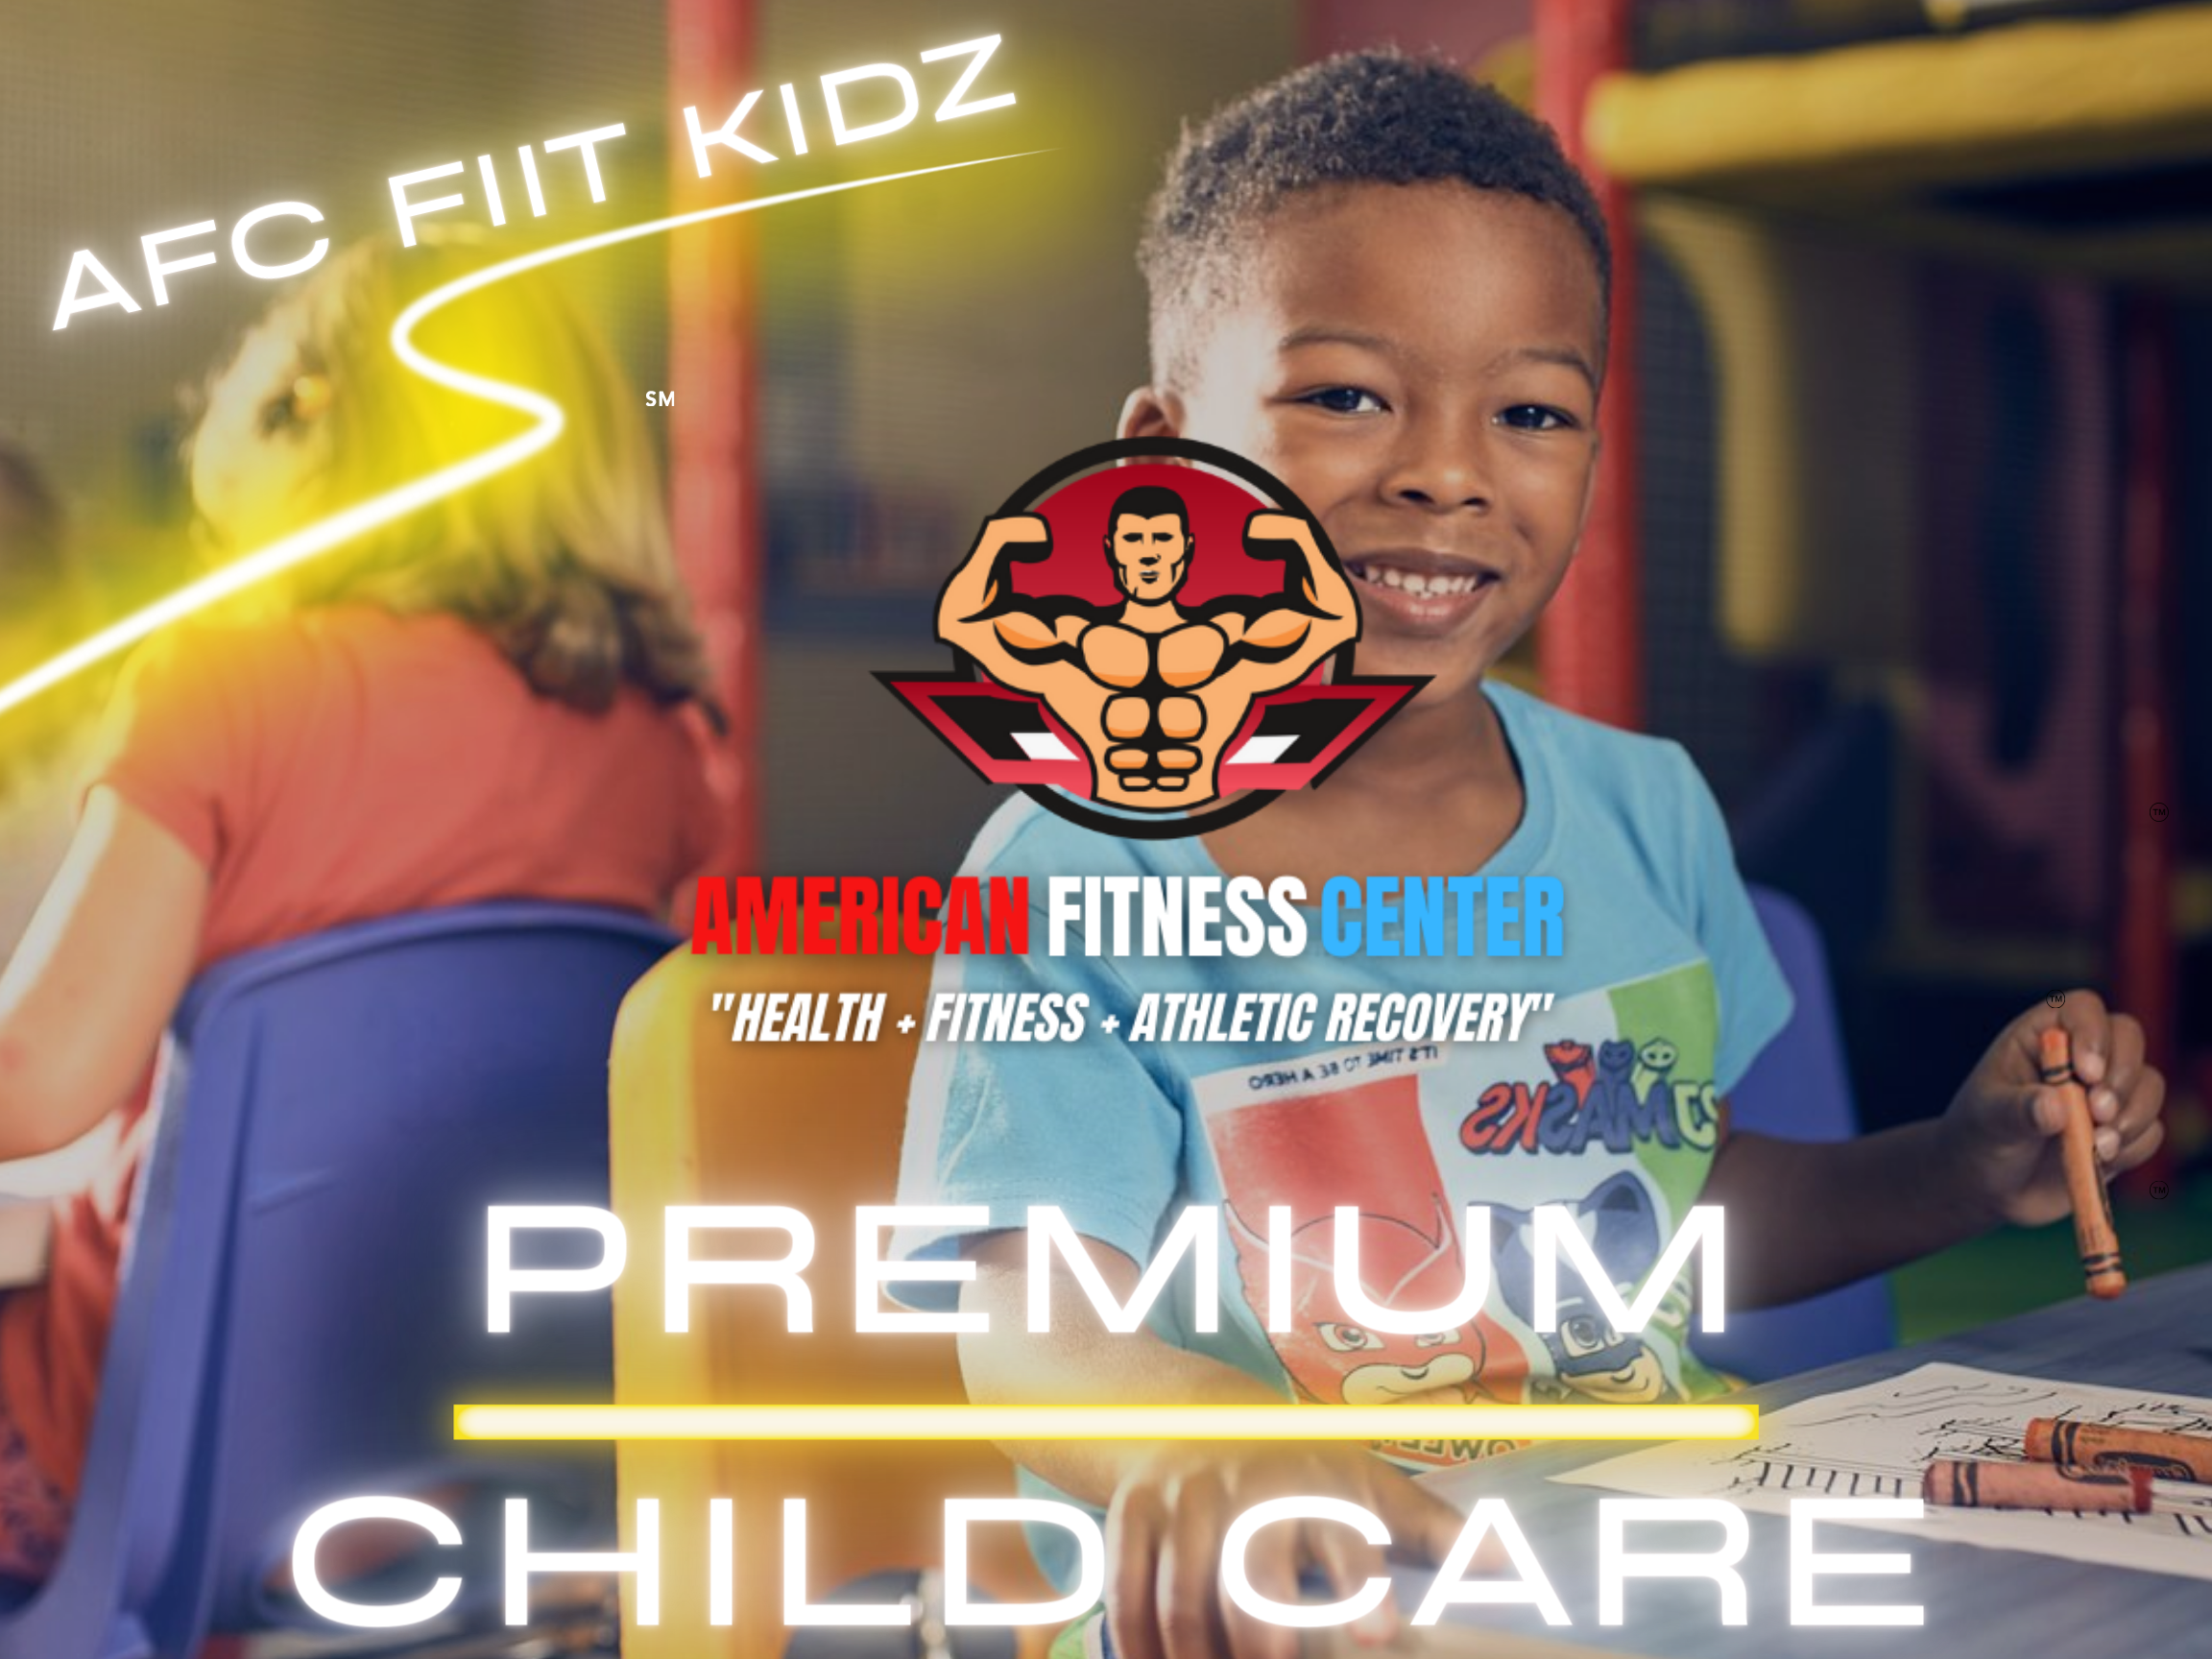 24-Hour-Gym-With-Child-Care-in-Snellville-GA-American-Fitness-Center-Snellville